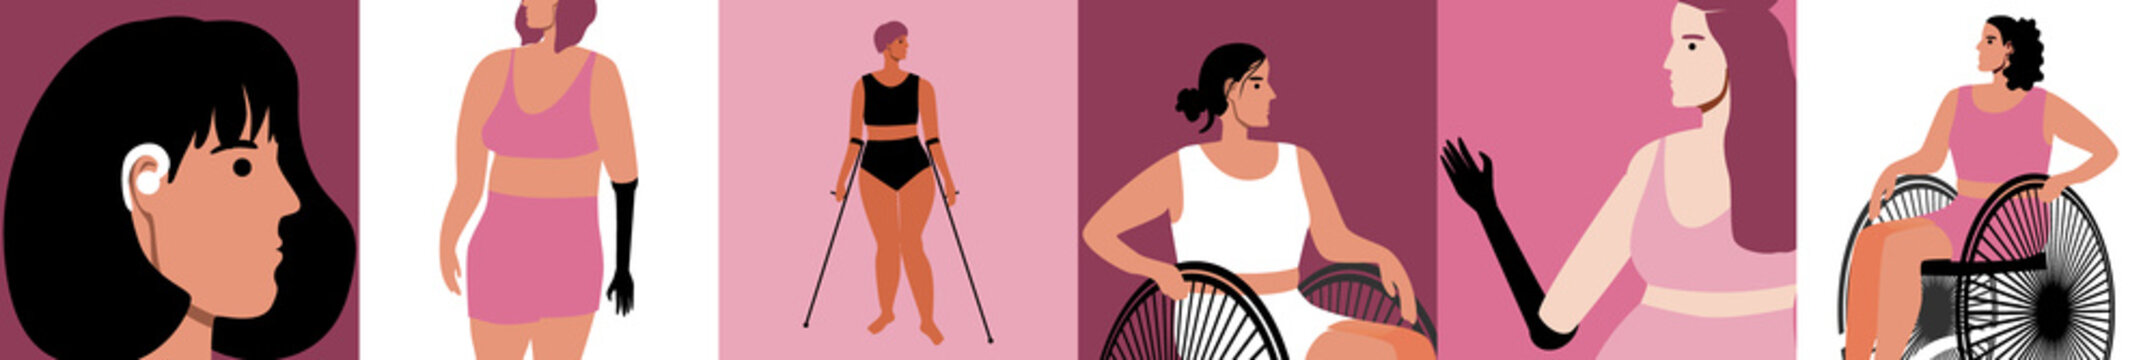 Inclusive women like collage, flat vector stock illustration with variety of appearances of deaf people with disabilities, wheelchair, prosthesis